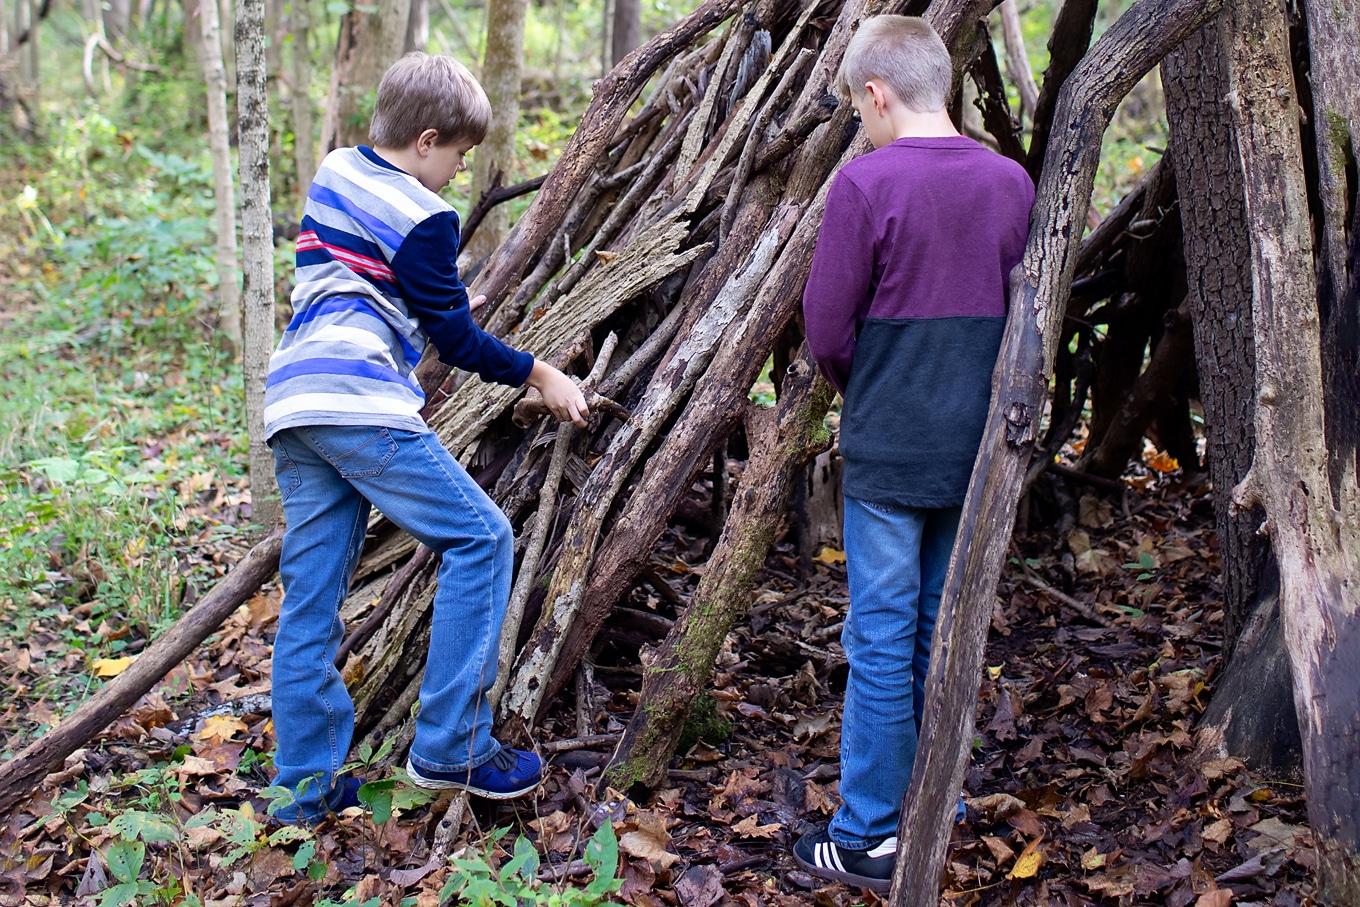 Children Building Forts in Nature